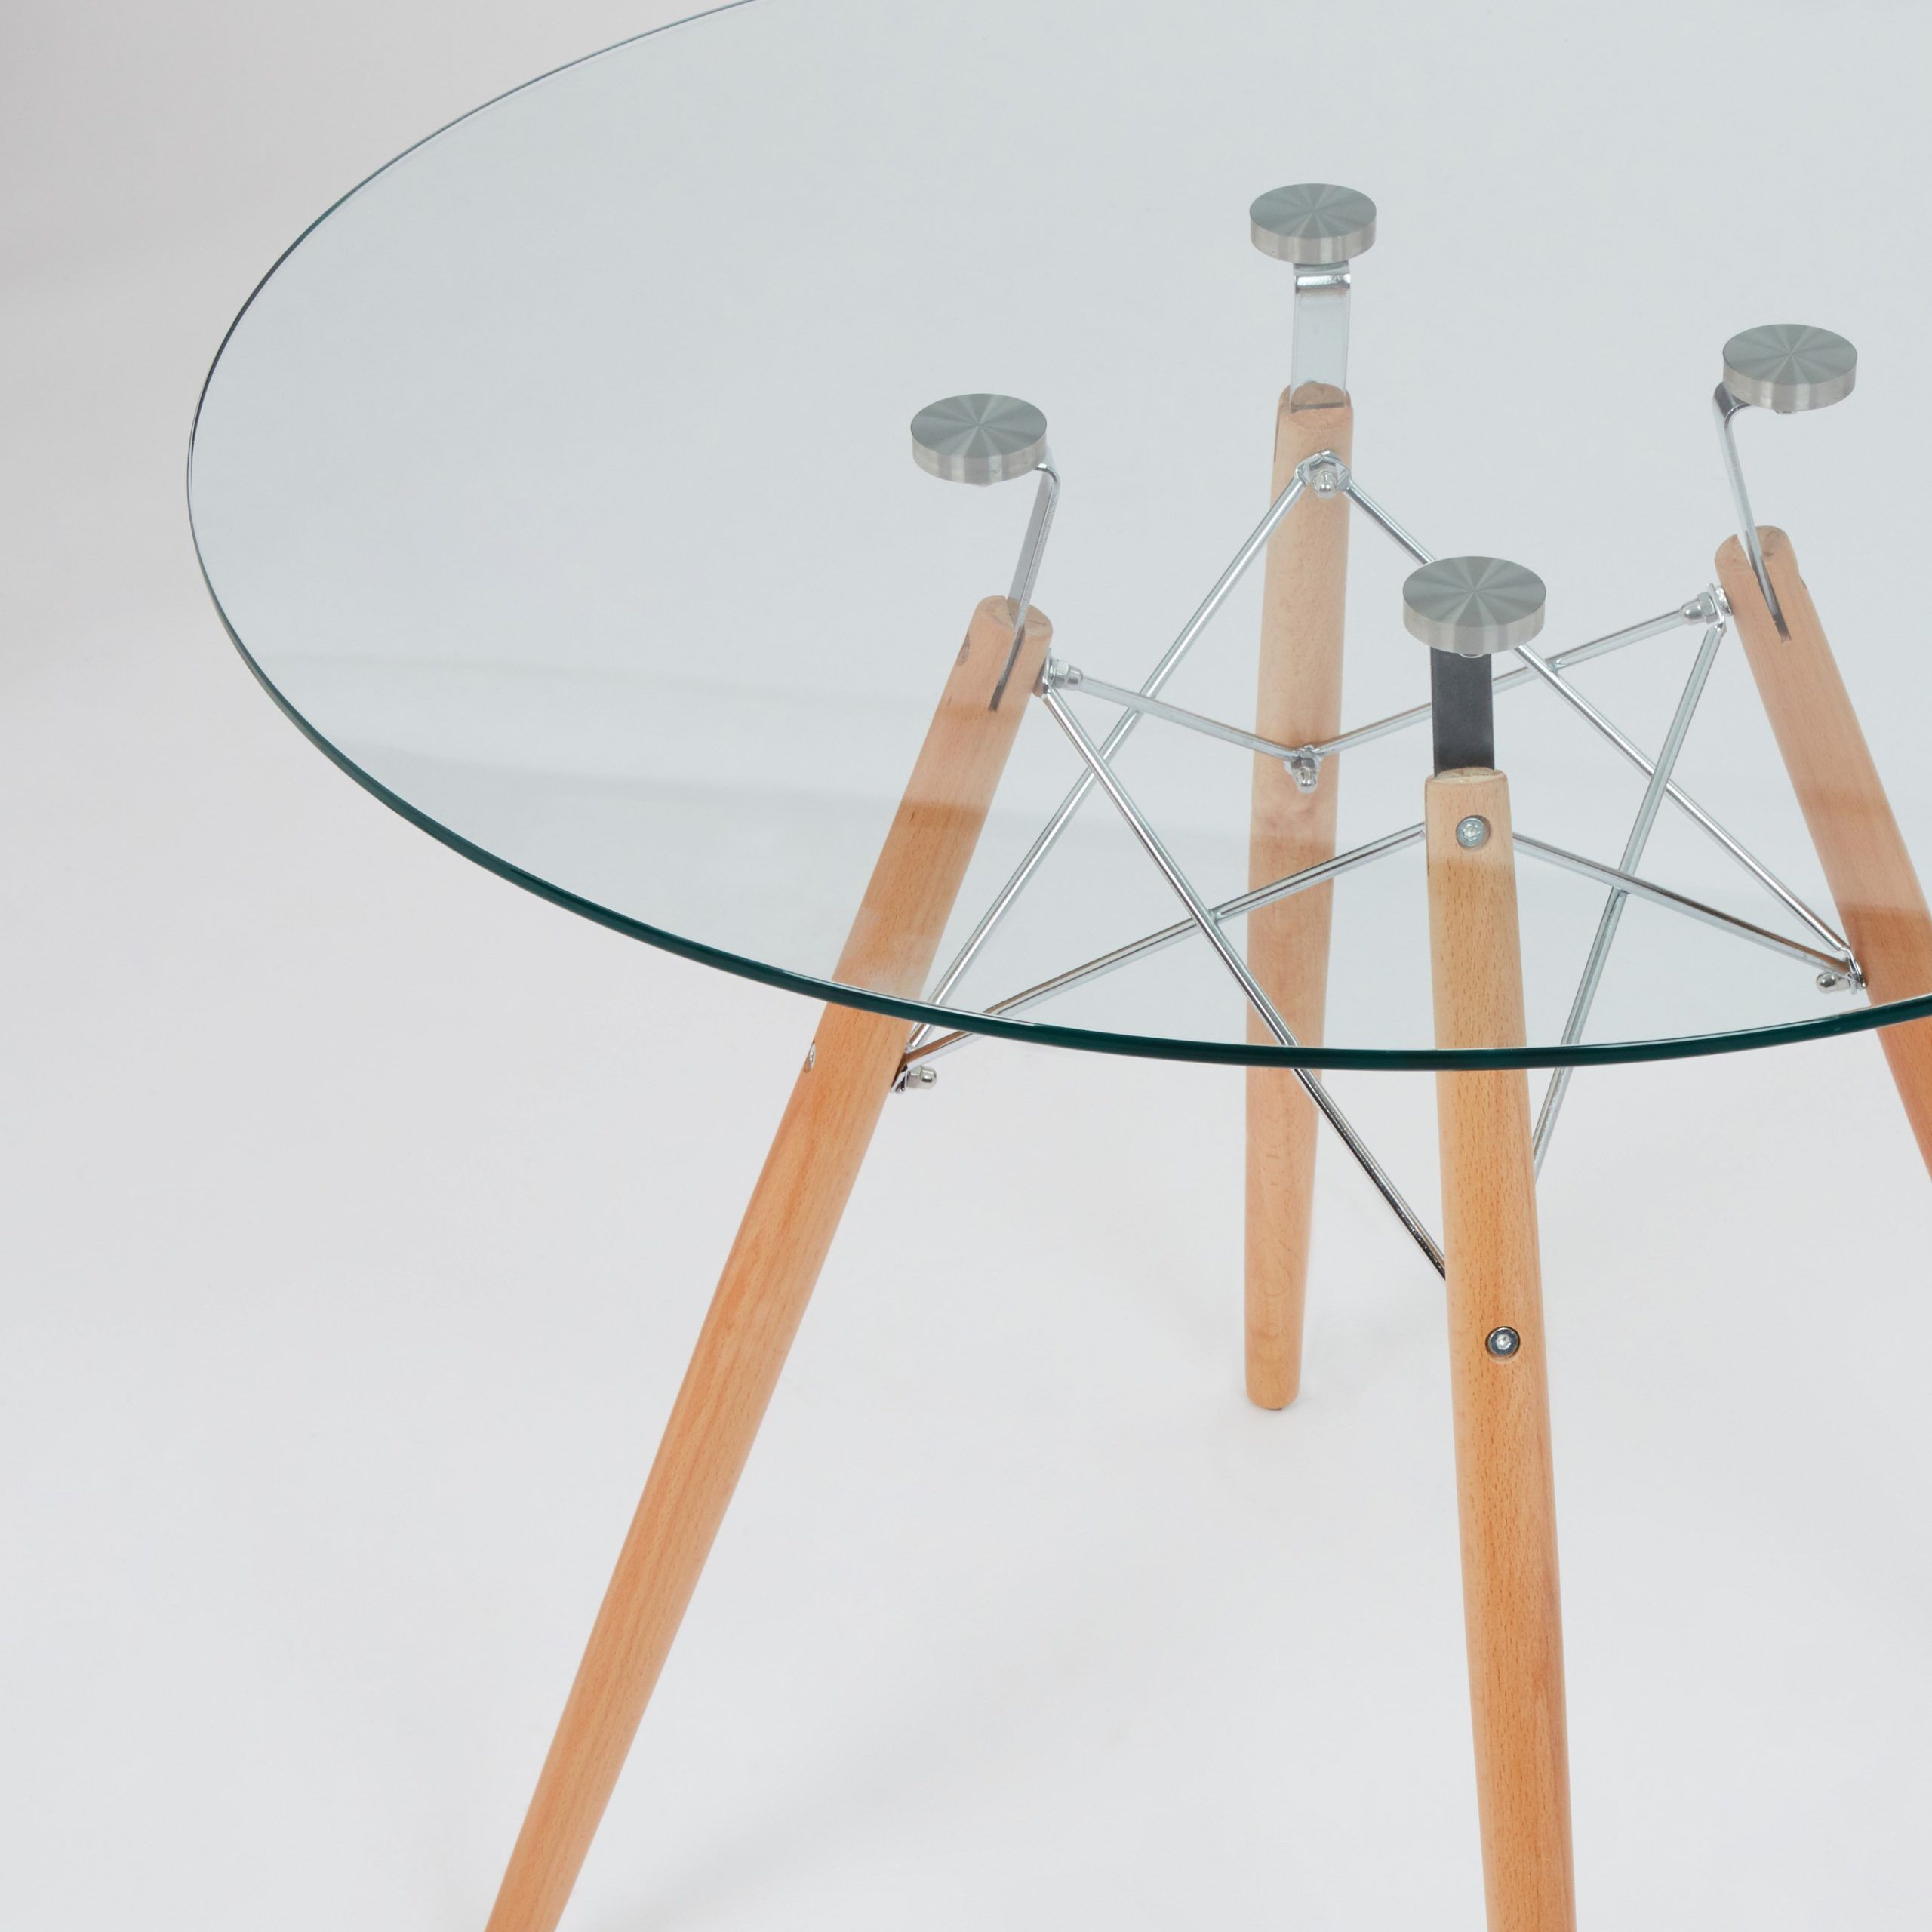 Widely Used Eames Style Dining Tables With Chromed Leg And Tempered Glass Top For Dining Glass Table With Beechwood Legs (size: 80cm (View 10 of 25)